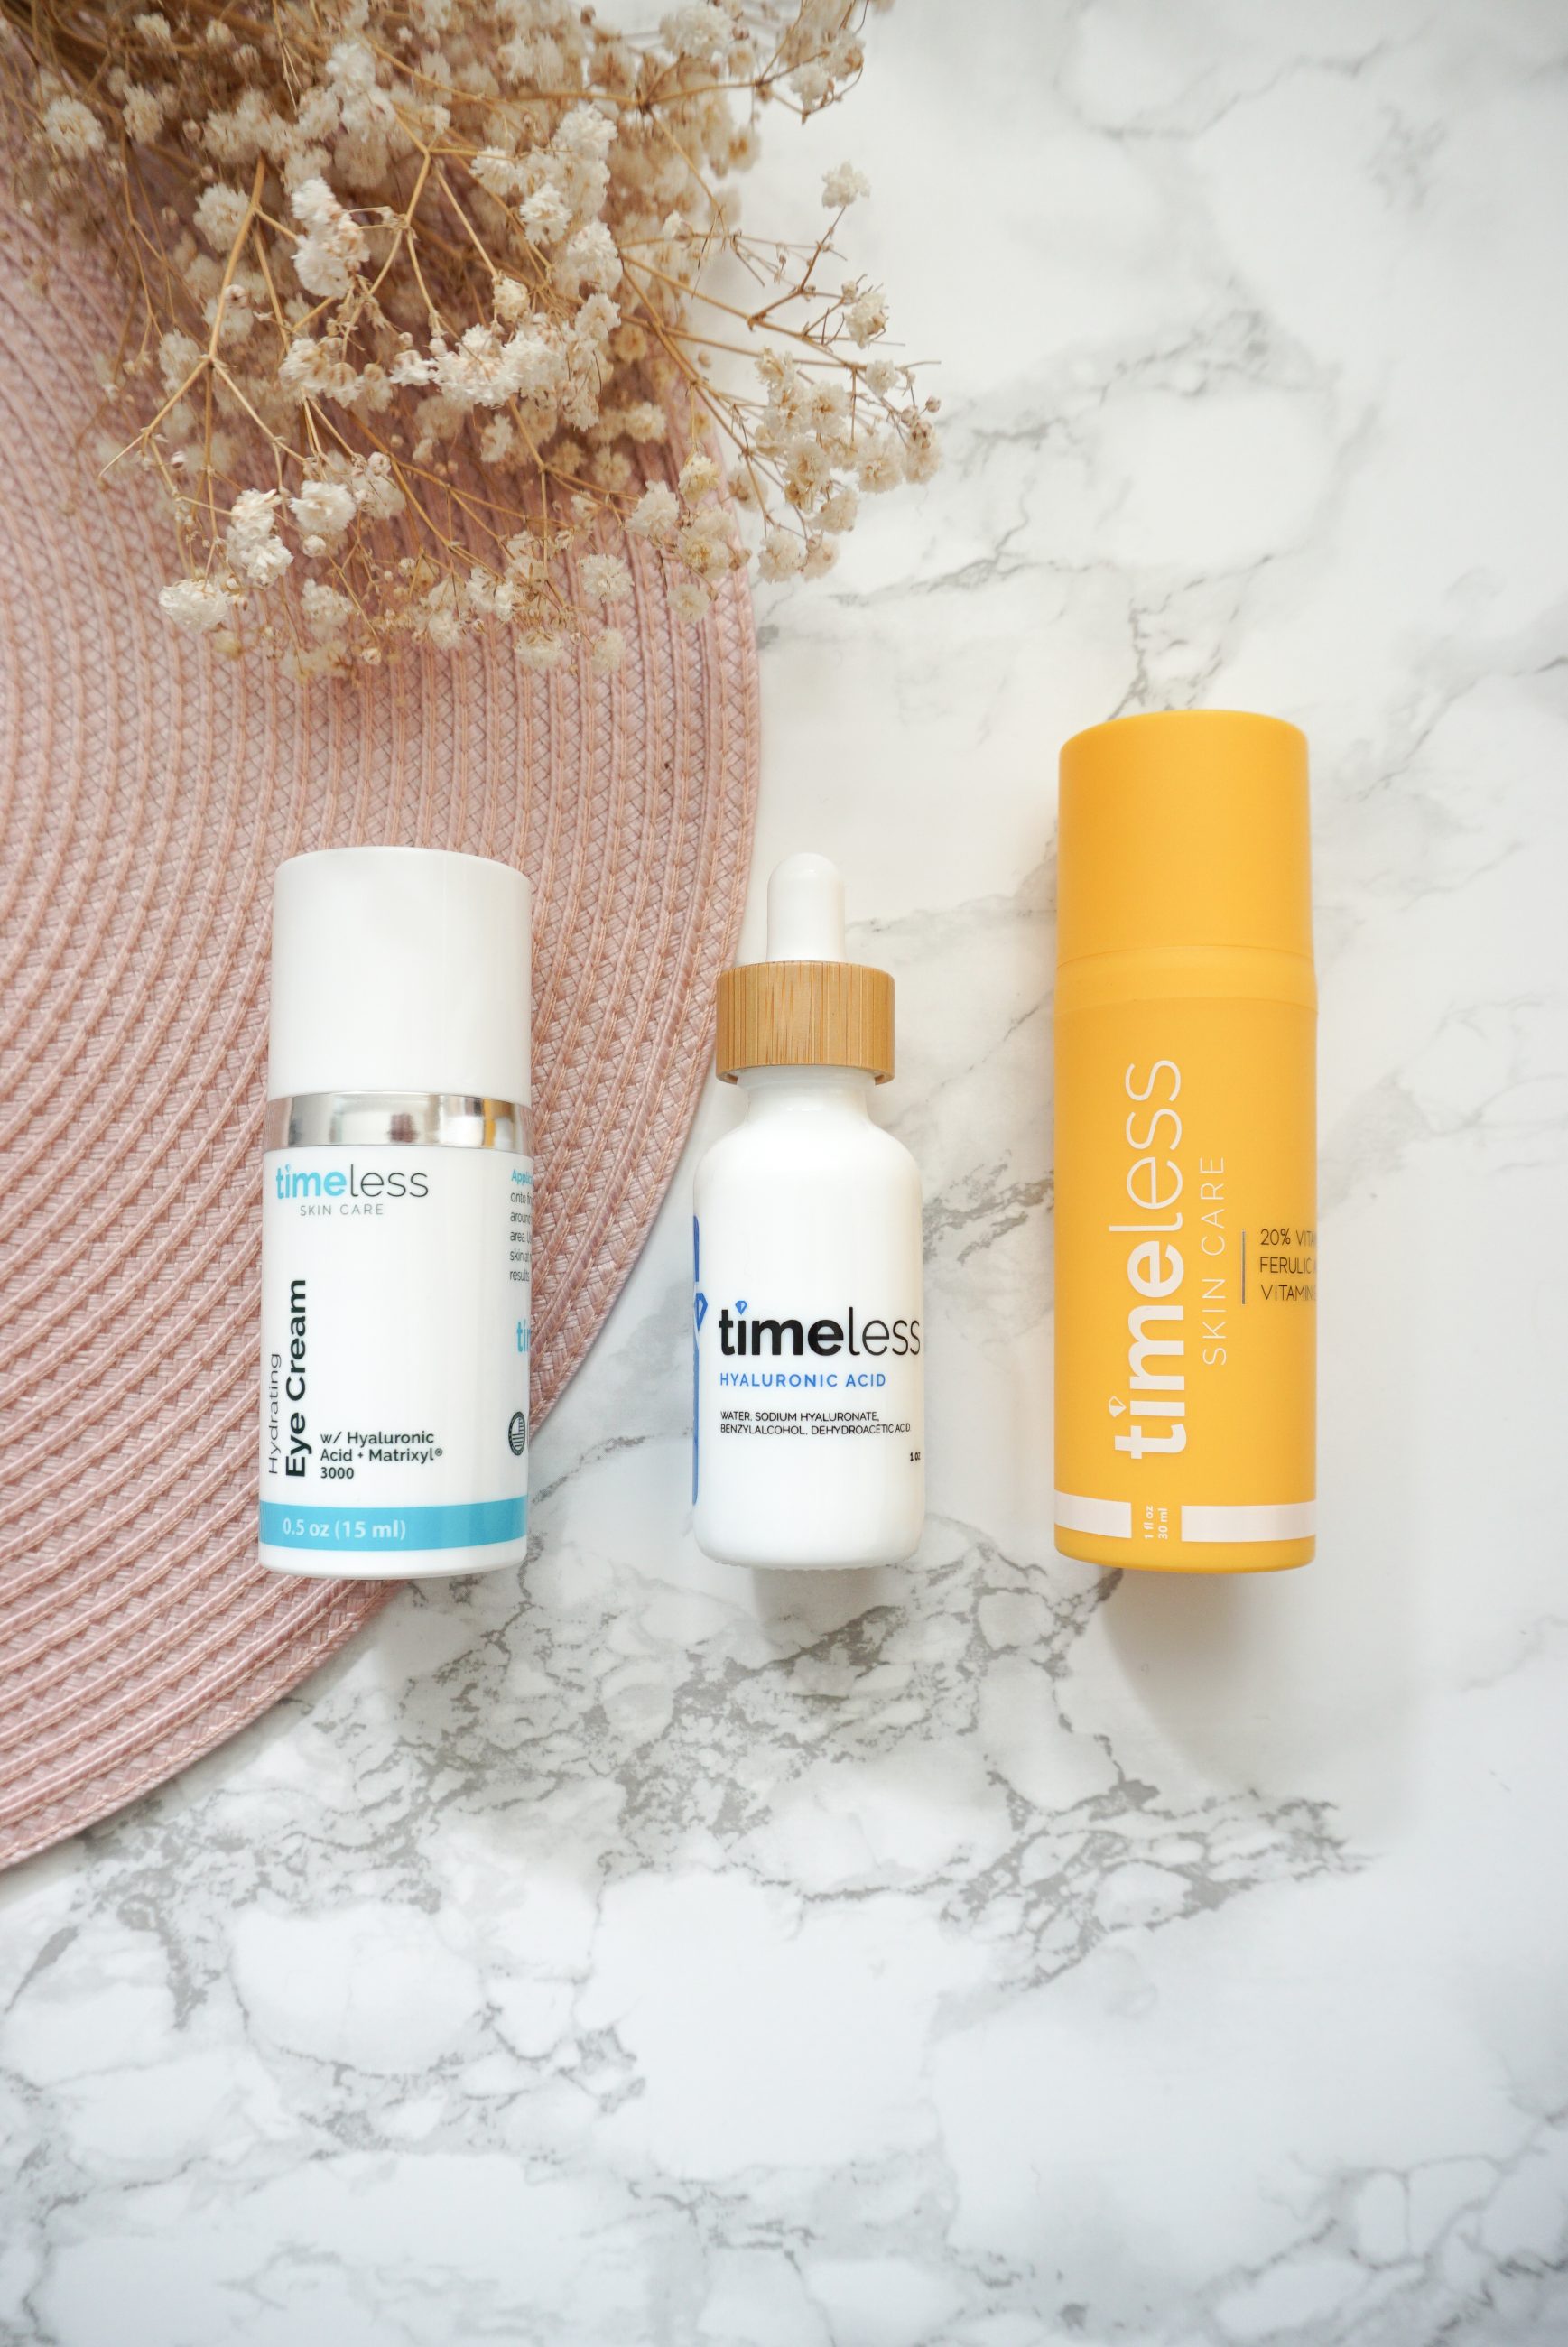 First Time Ever Trying Timeless Skincare Products